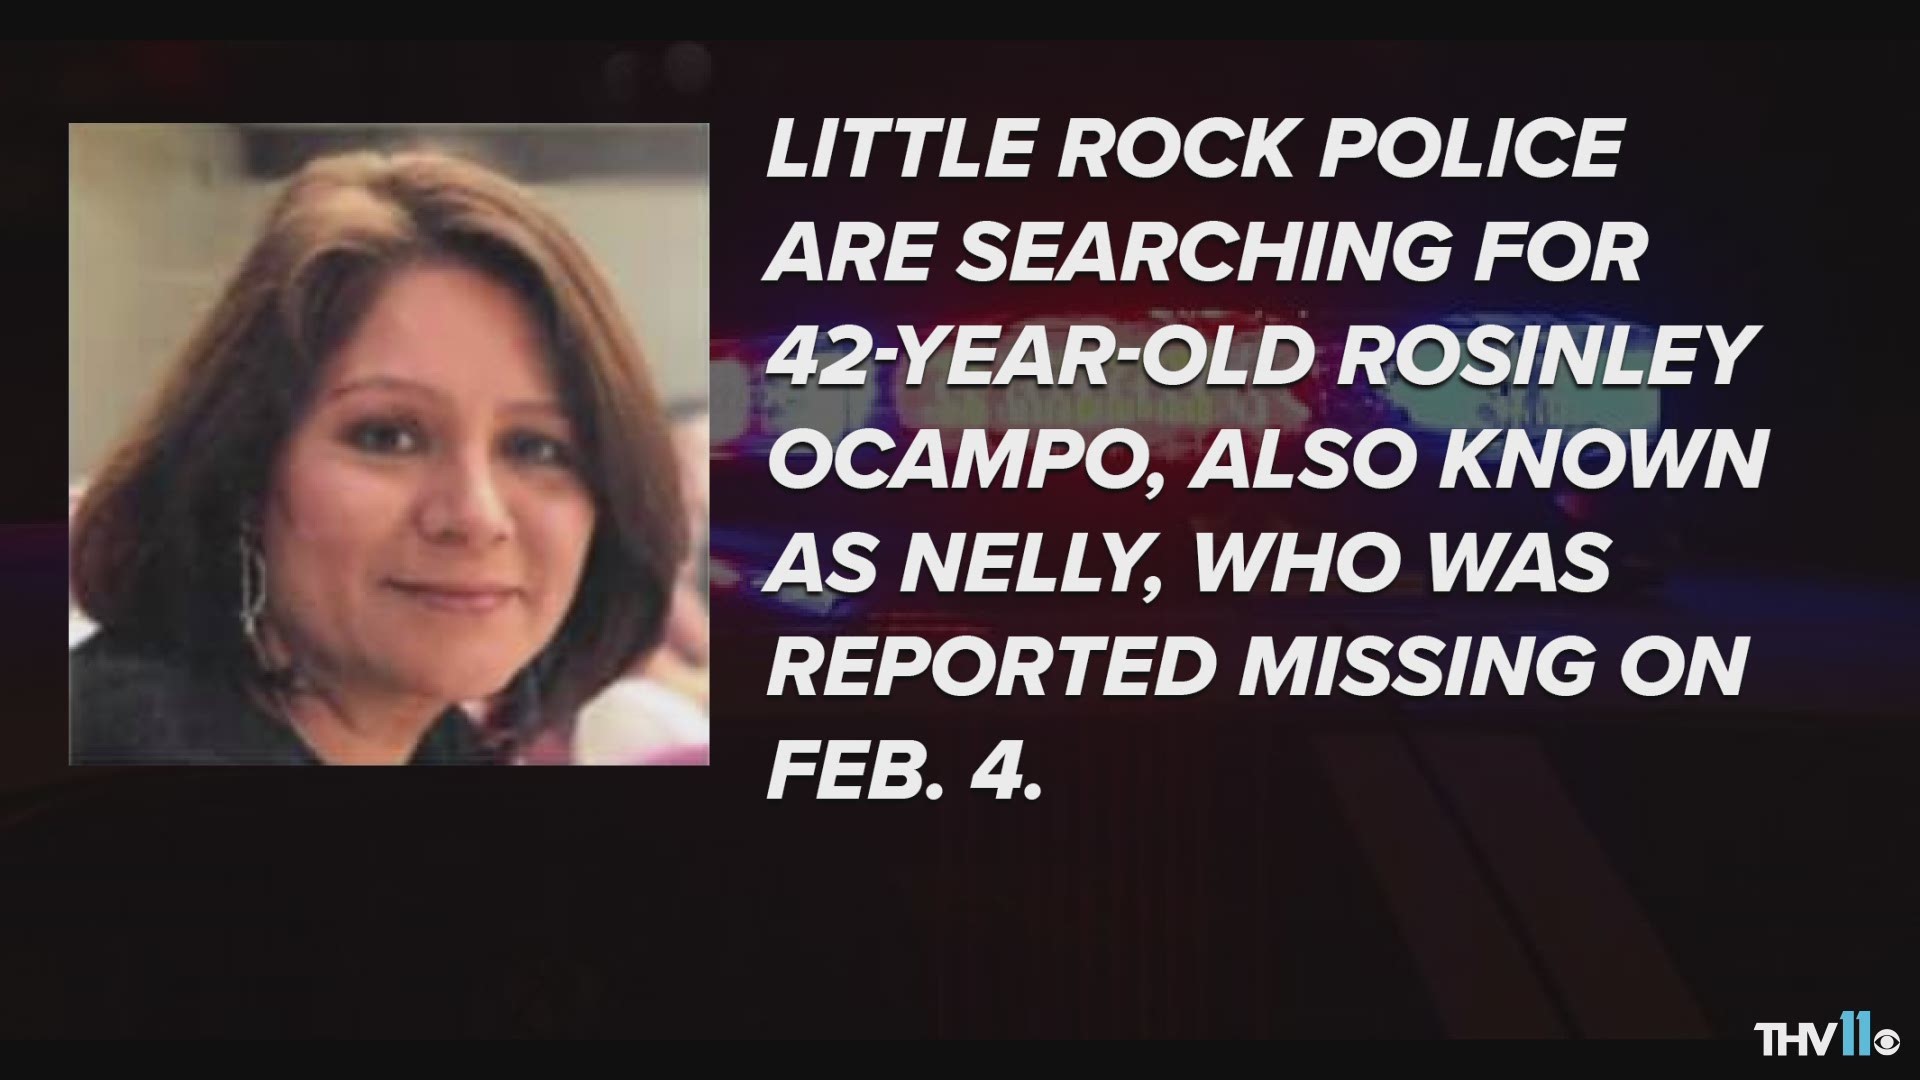 LRPD searching for 42-year-old woman missing since Feb. 4